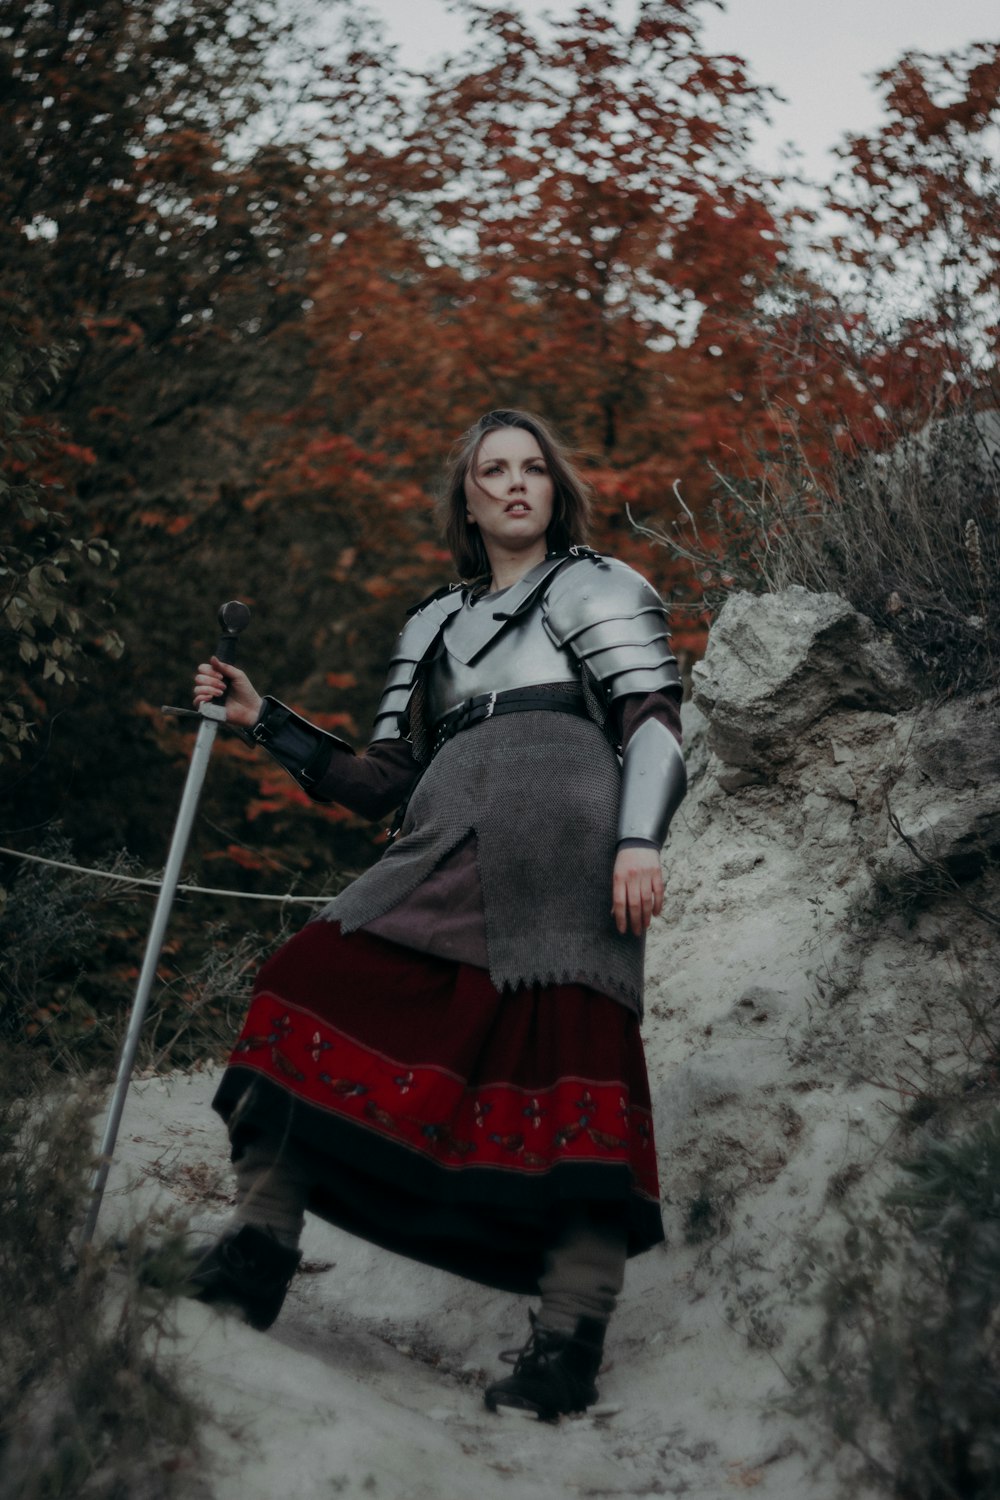 a woman dressed in medieval clothing is walking up a hill